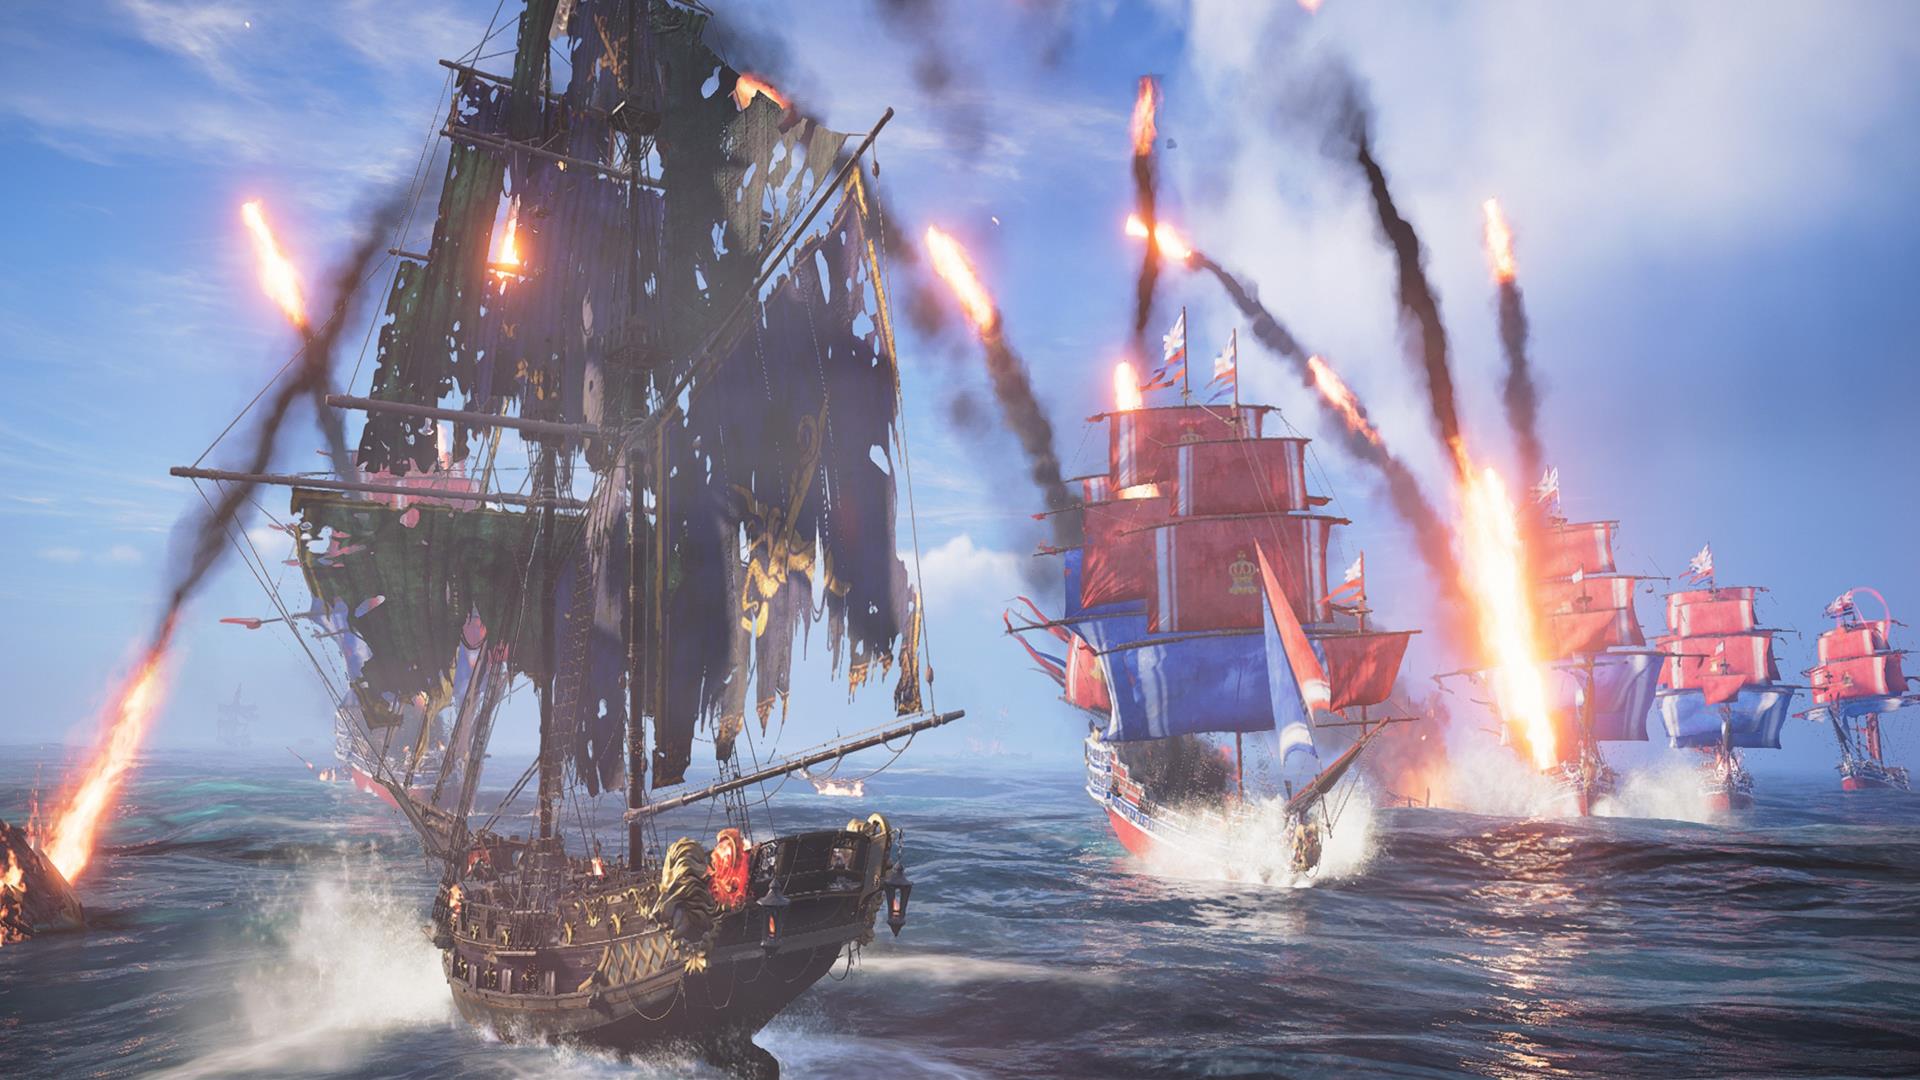 Two ships battle one another in Skull and Bones.